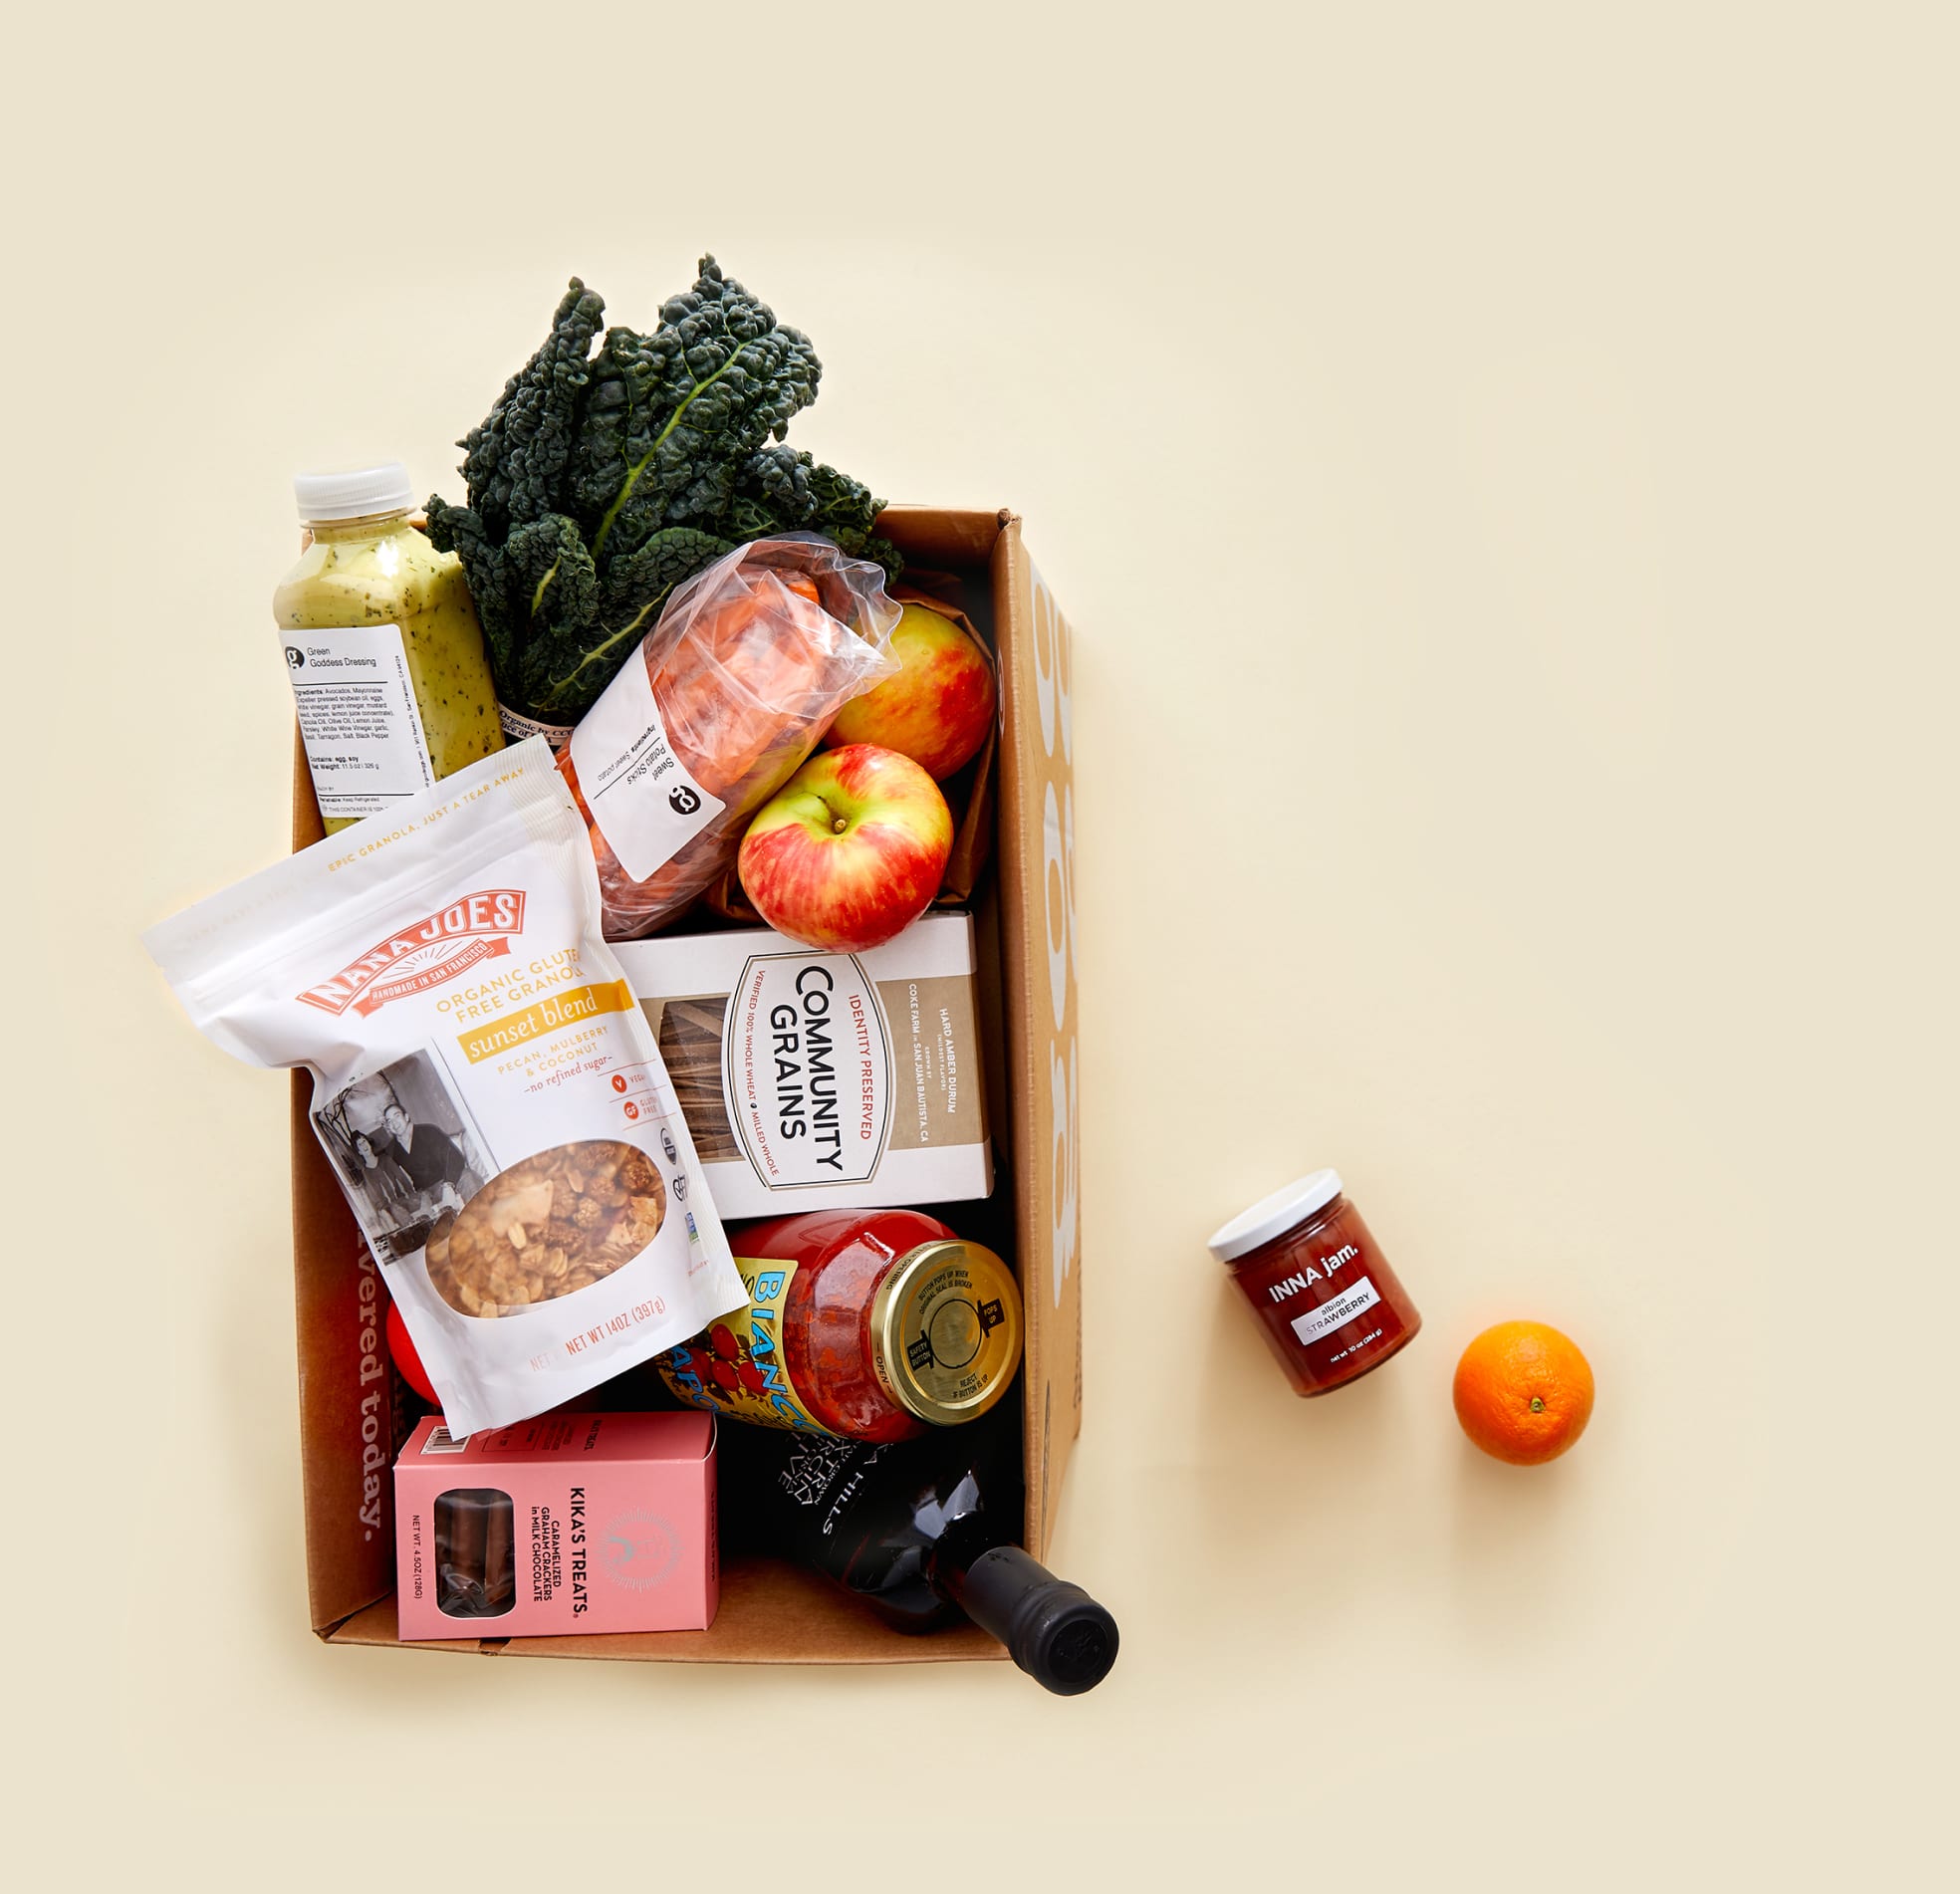 Bird's-eye view of a Good Eggs cardboard box of groceries including fresh vegetables, fruit, juice and jam on a beige surface.